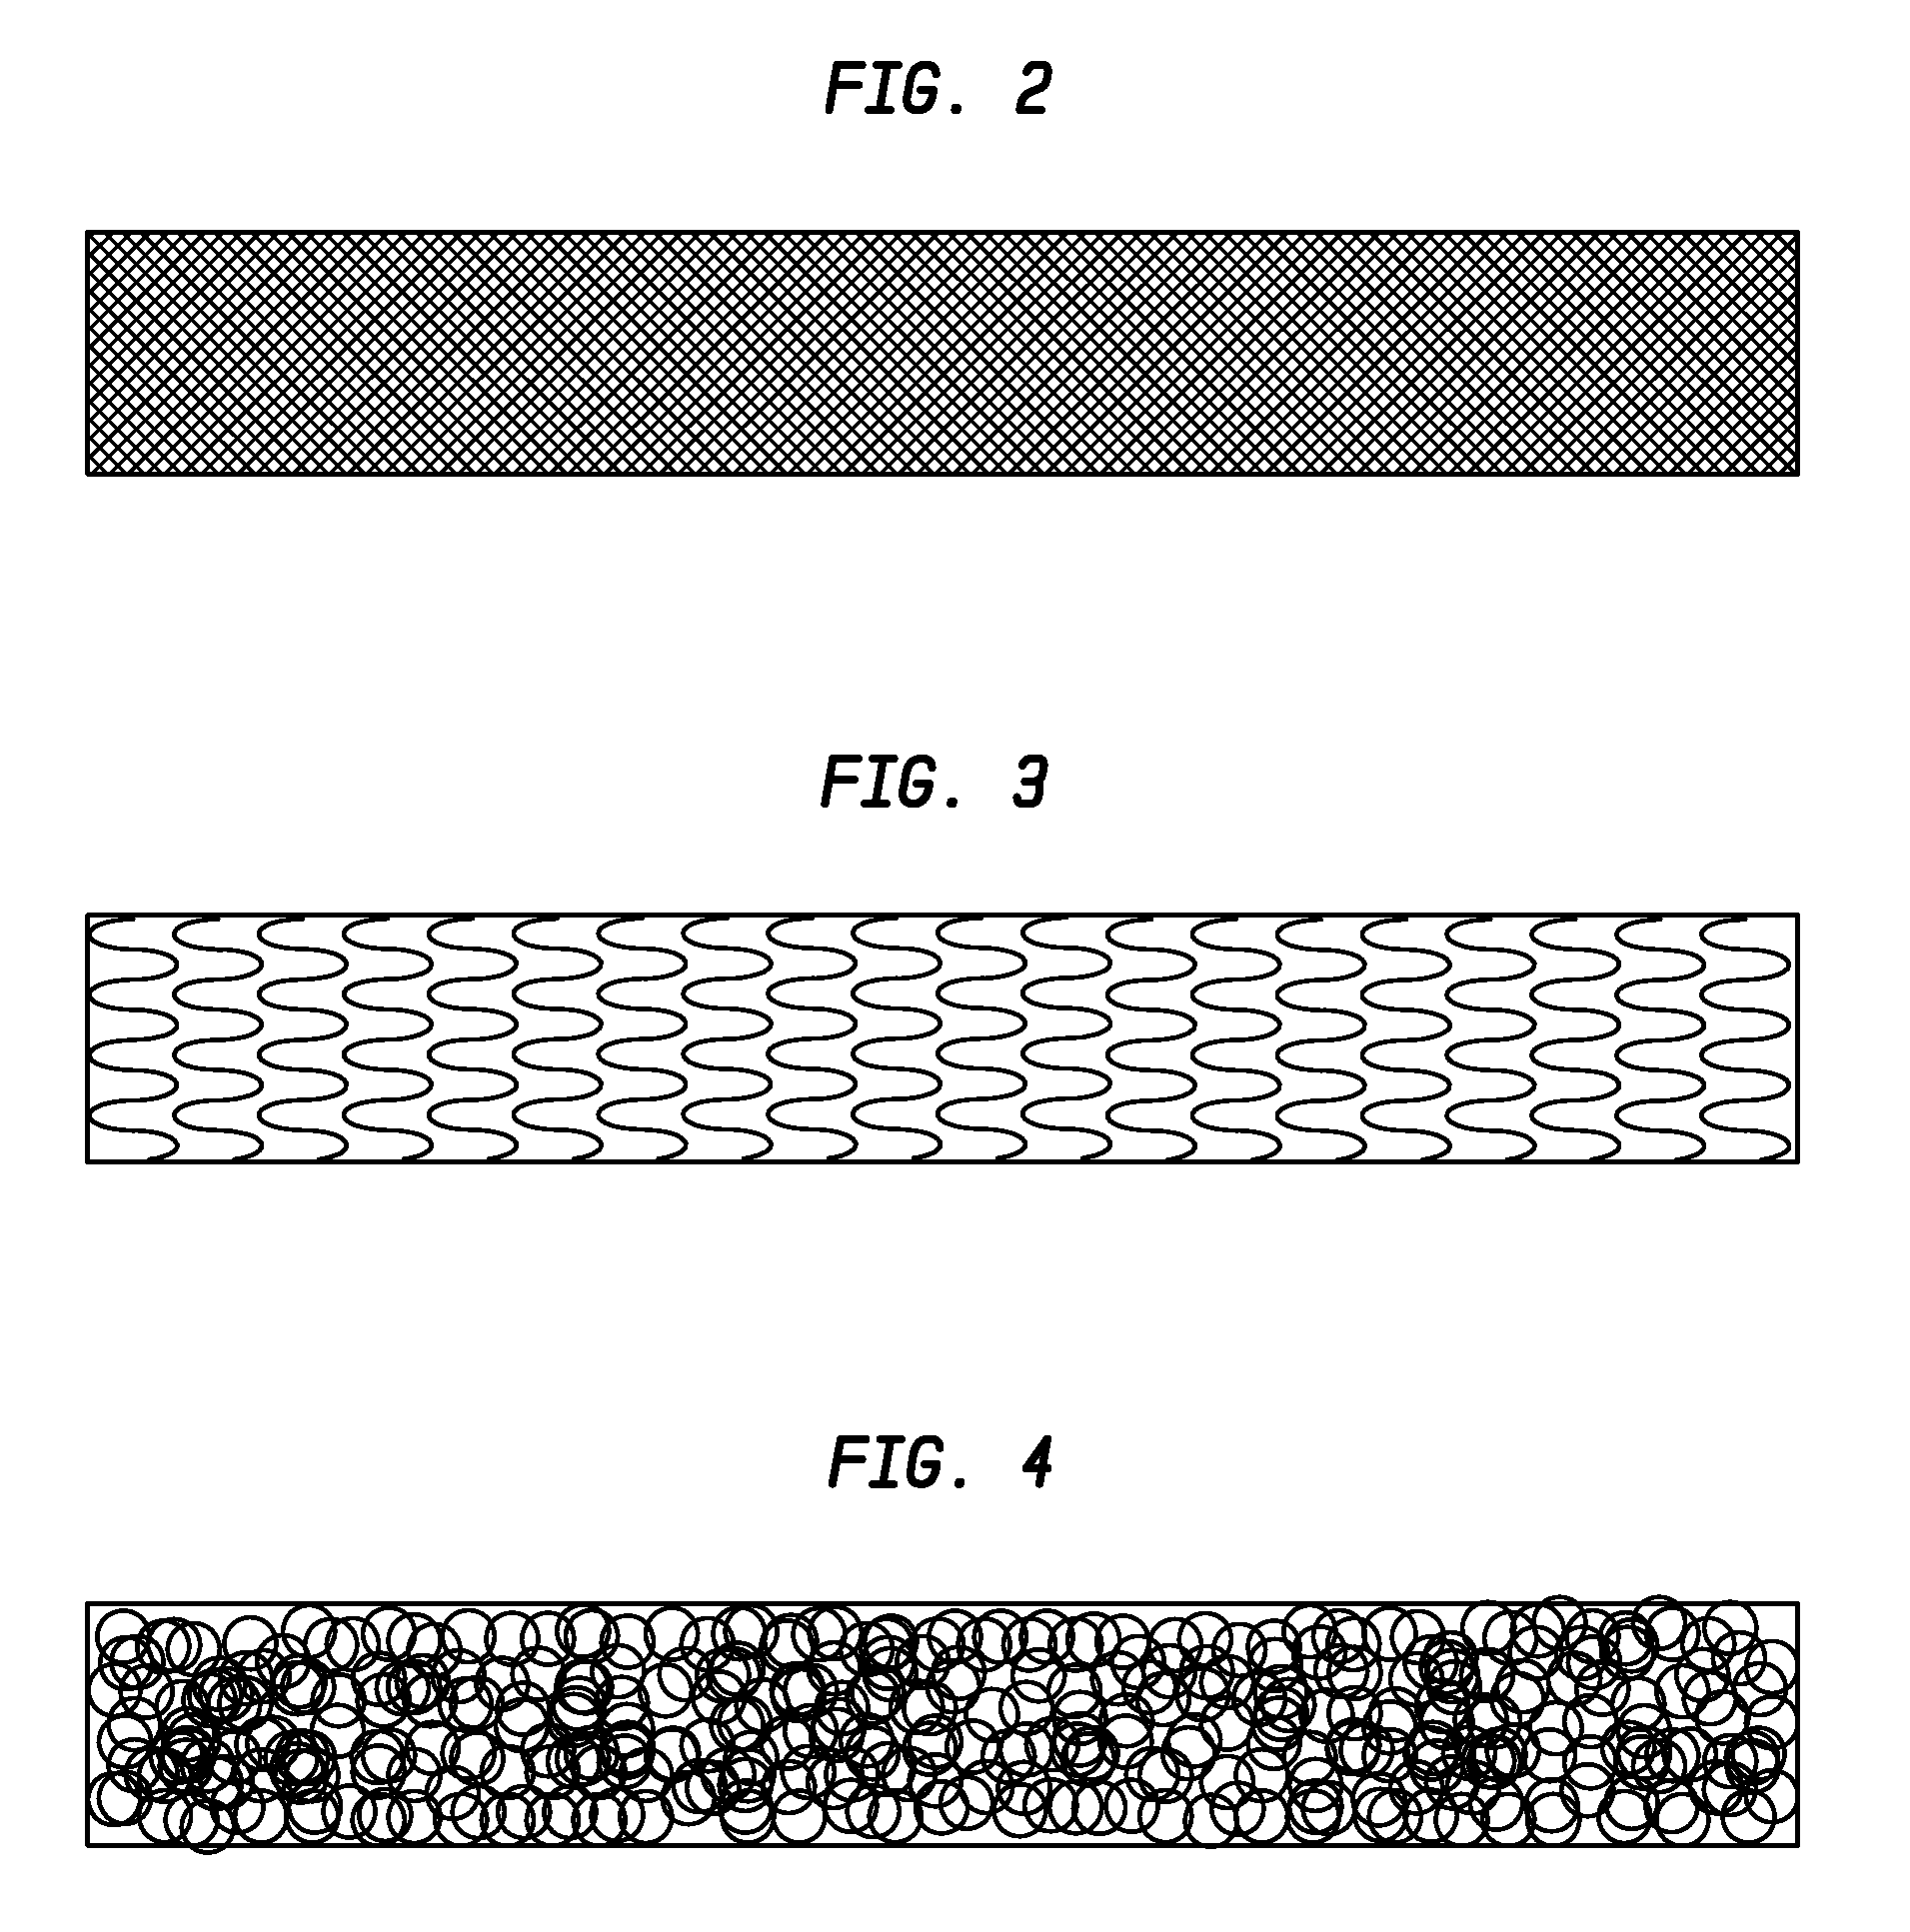 Absorbent cellulosic products with regenerated cellulose formed in-situ